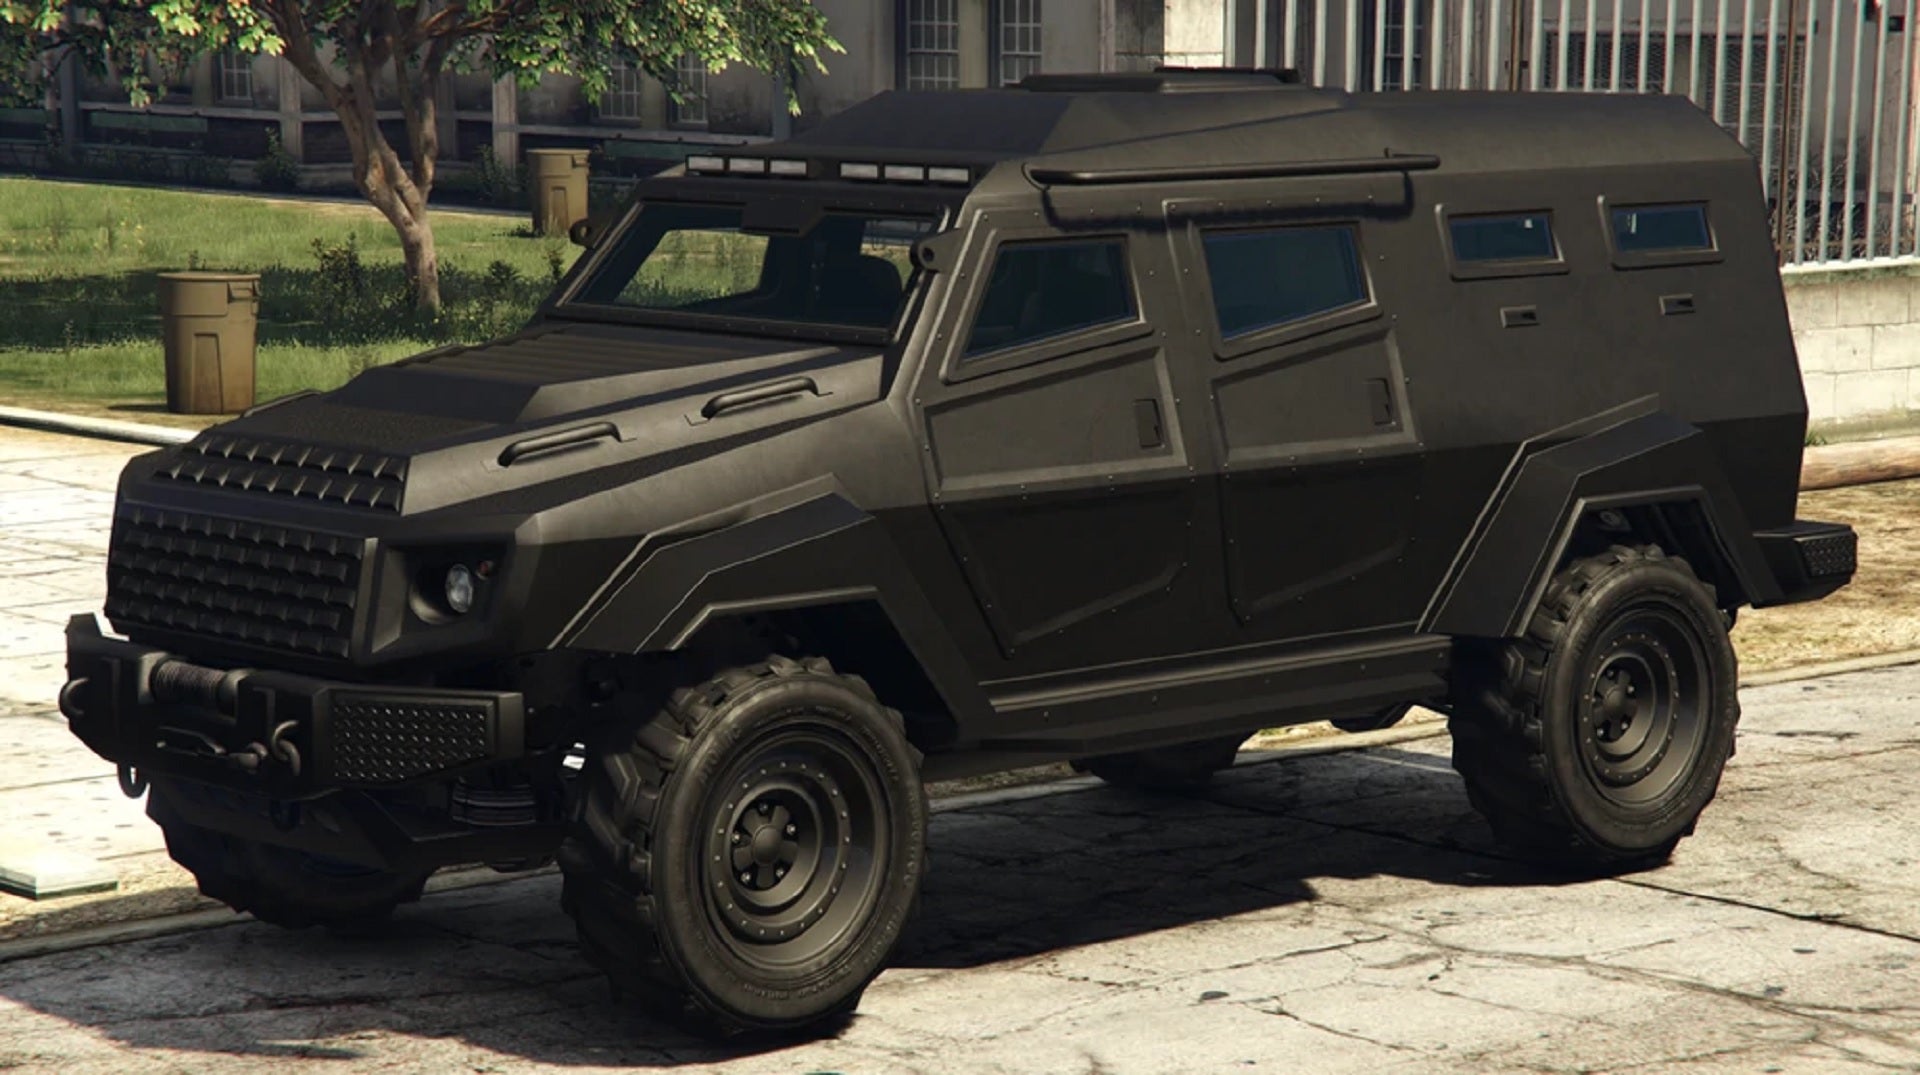 The Insurgent SUV in GTA Online.